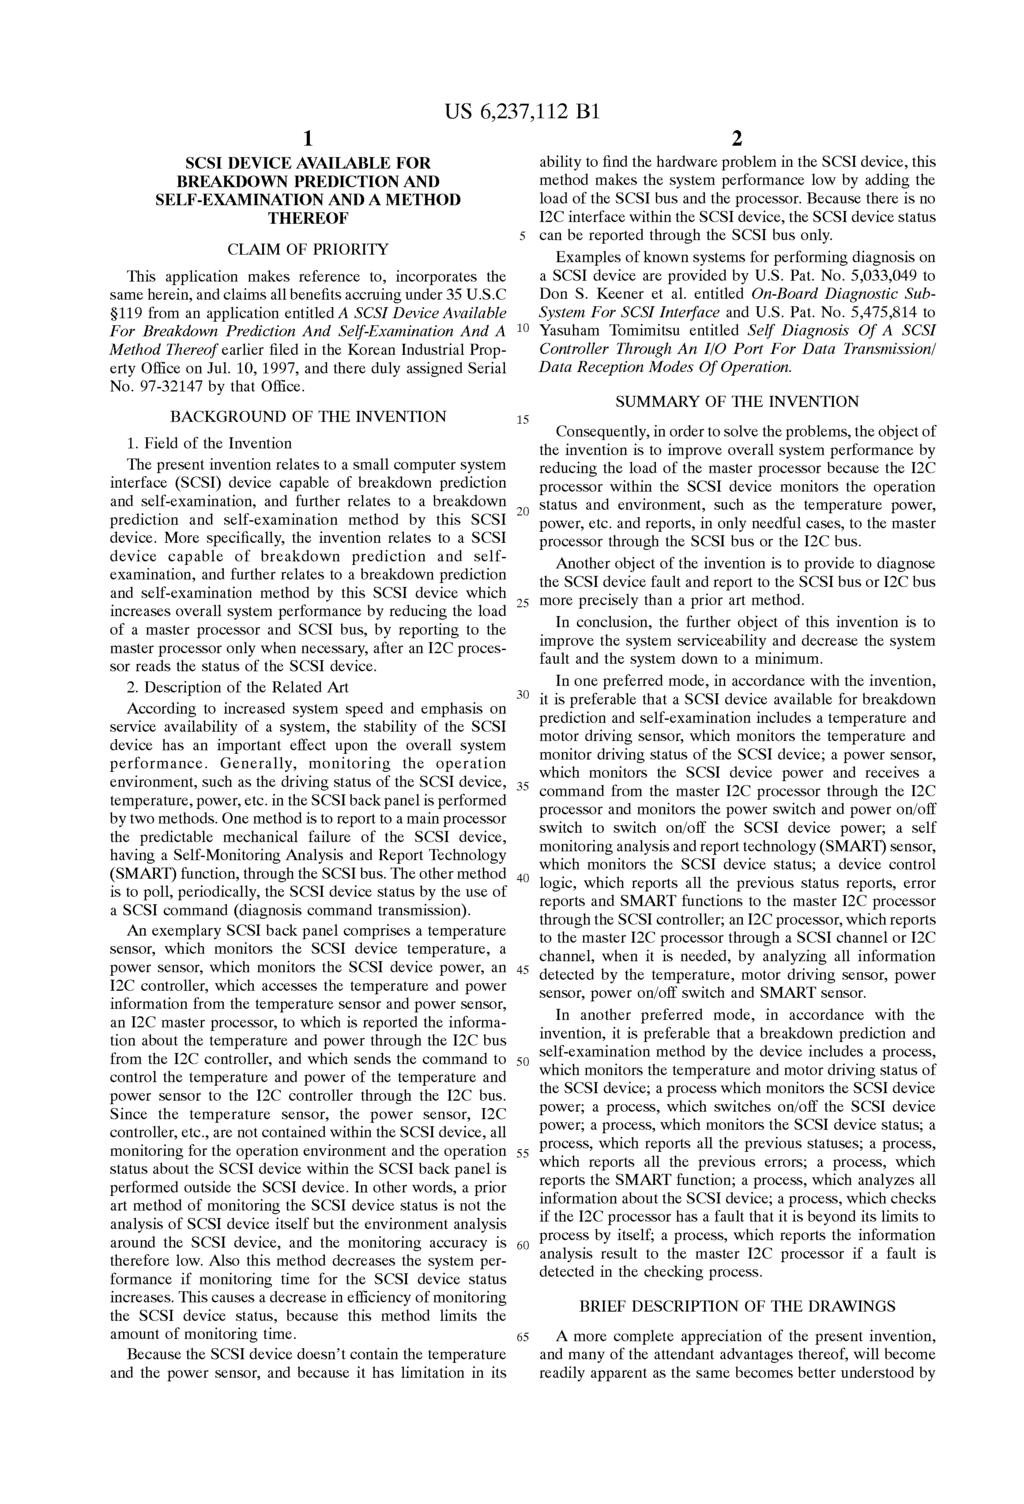 1 SCSI DEVICE AVAILABLE FOR BREAKDOWN PREDICTION AND SELF-EXAMINATION AND A METHOD THEREOF CLAIM OF PRIORITY This application makes reference to, incorporates the Same herein, and claims all benefits